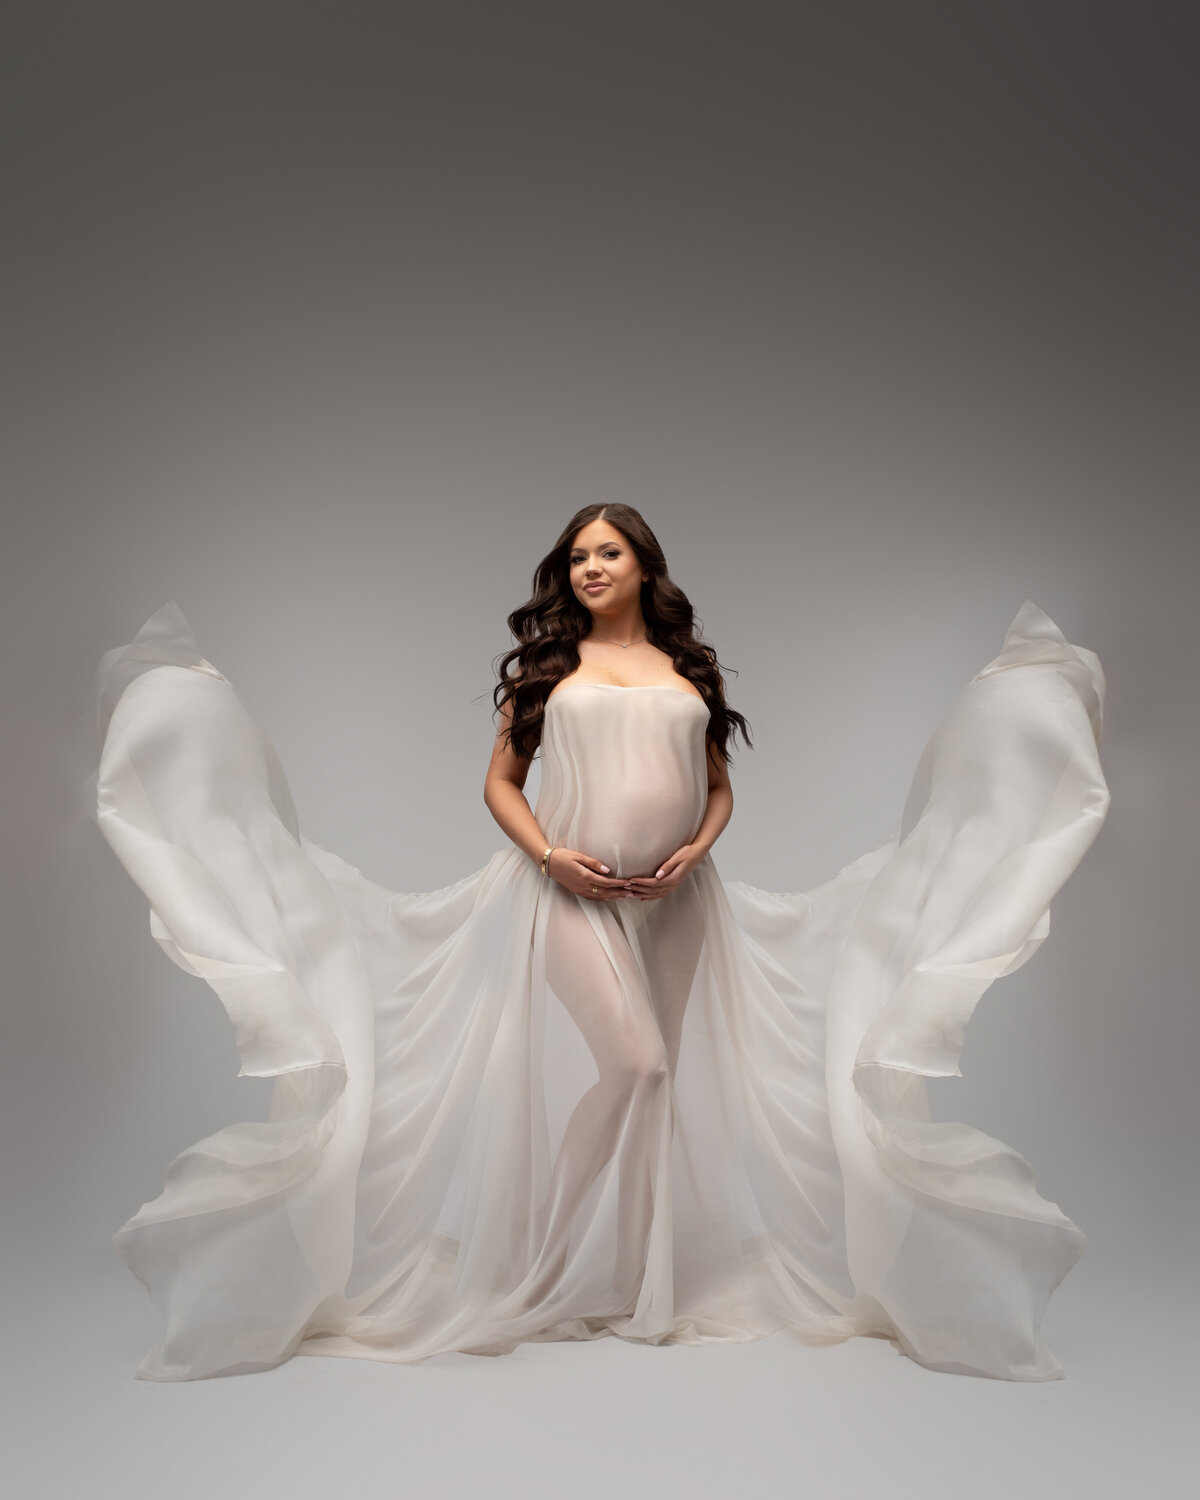 Pregnant woman wearing flowing white fabric looks like angel wings on white backdrop